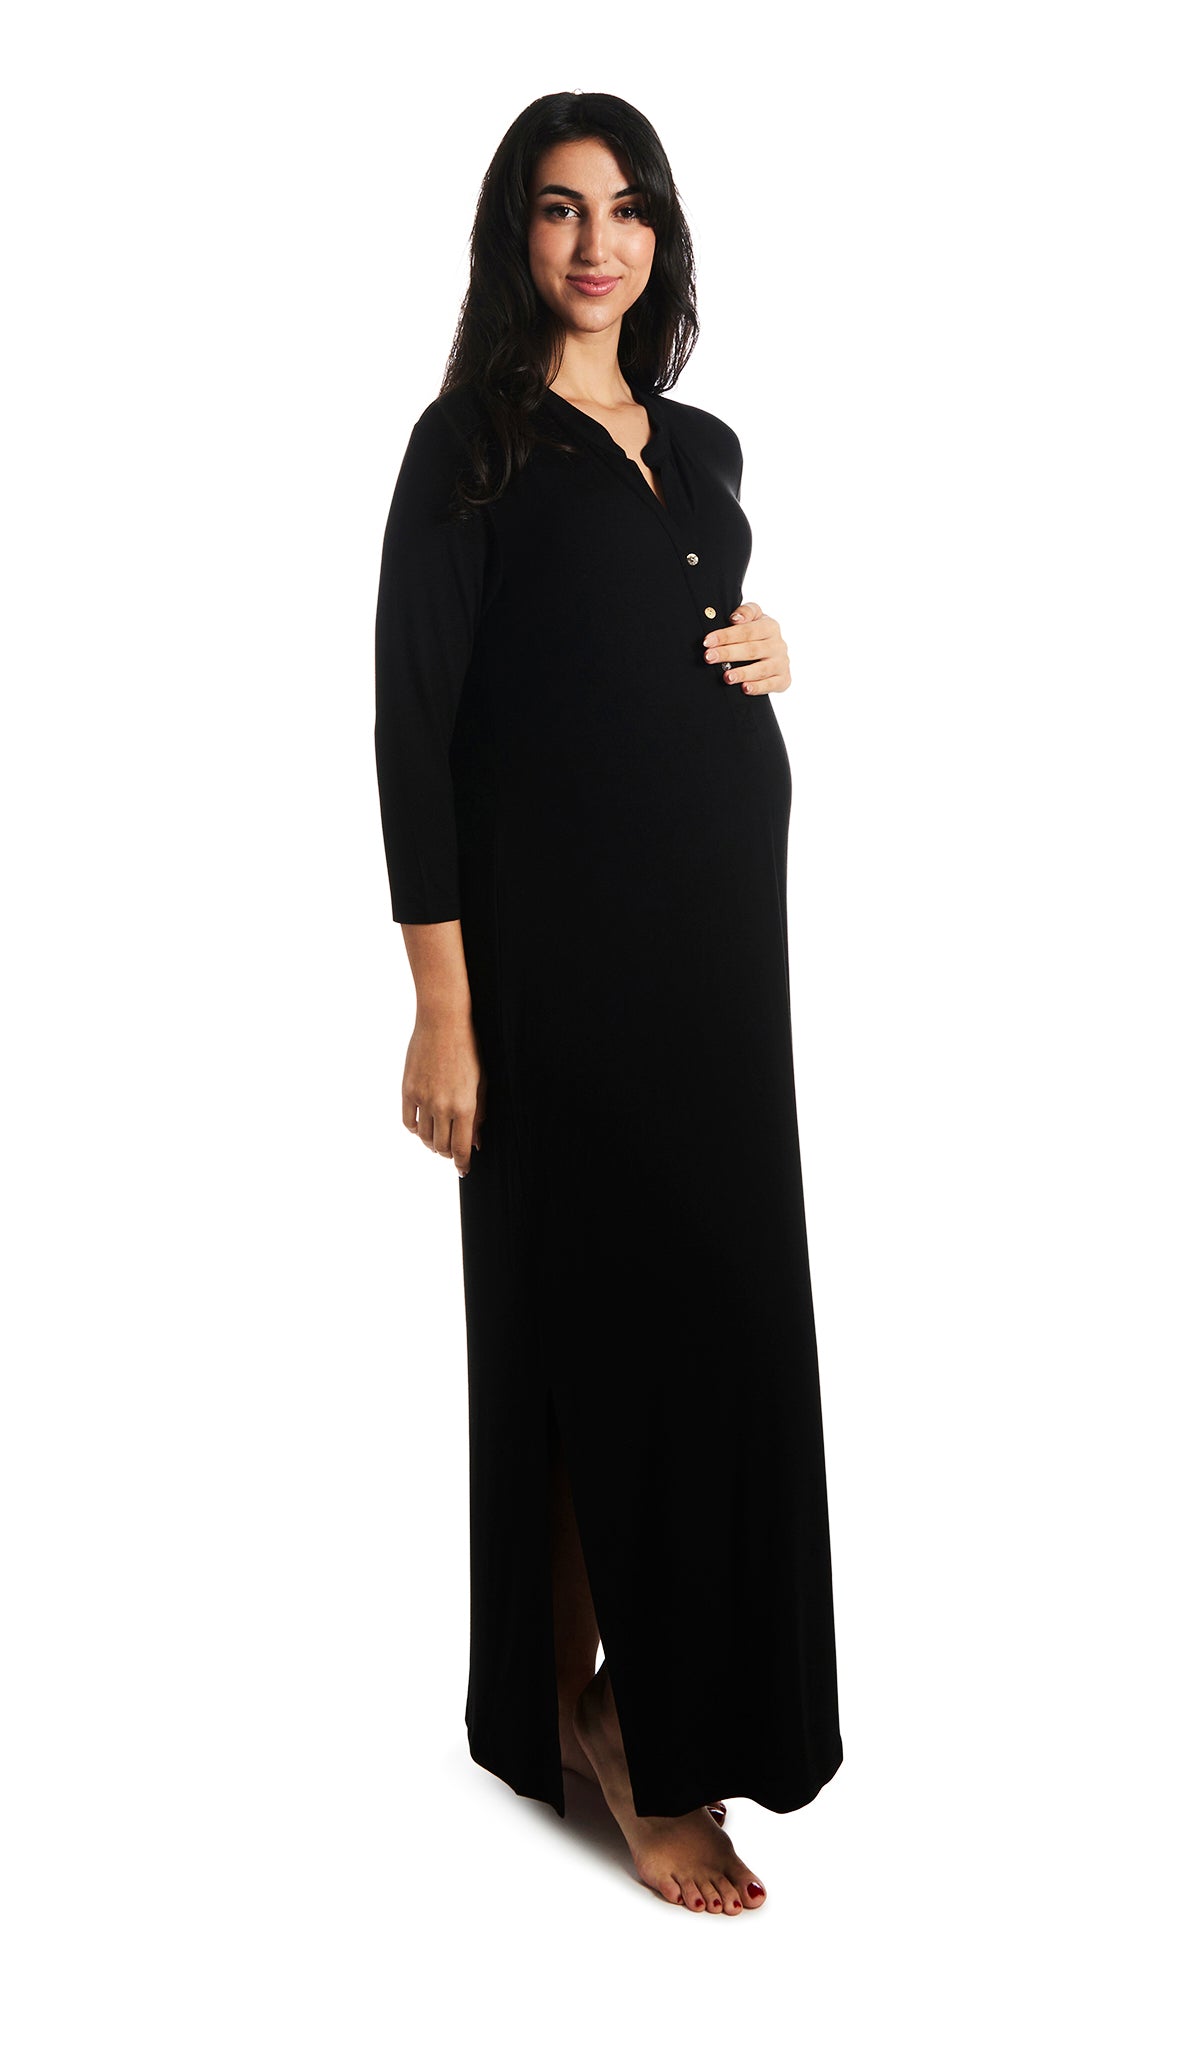 Black Juliana dress. Pregnant woman with one hand on belly wearing caftan featuring long sleeve button-up V-neckline with band collar and a maxi-length hem with airy side slits.